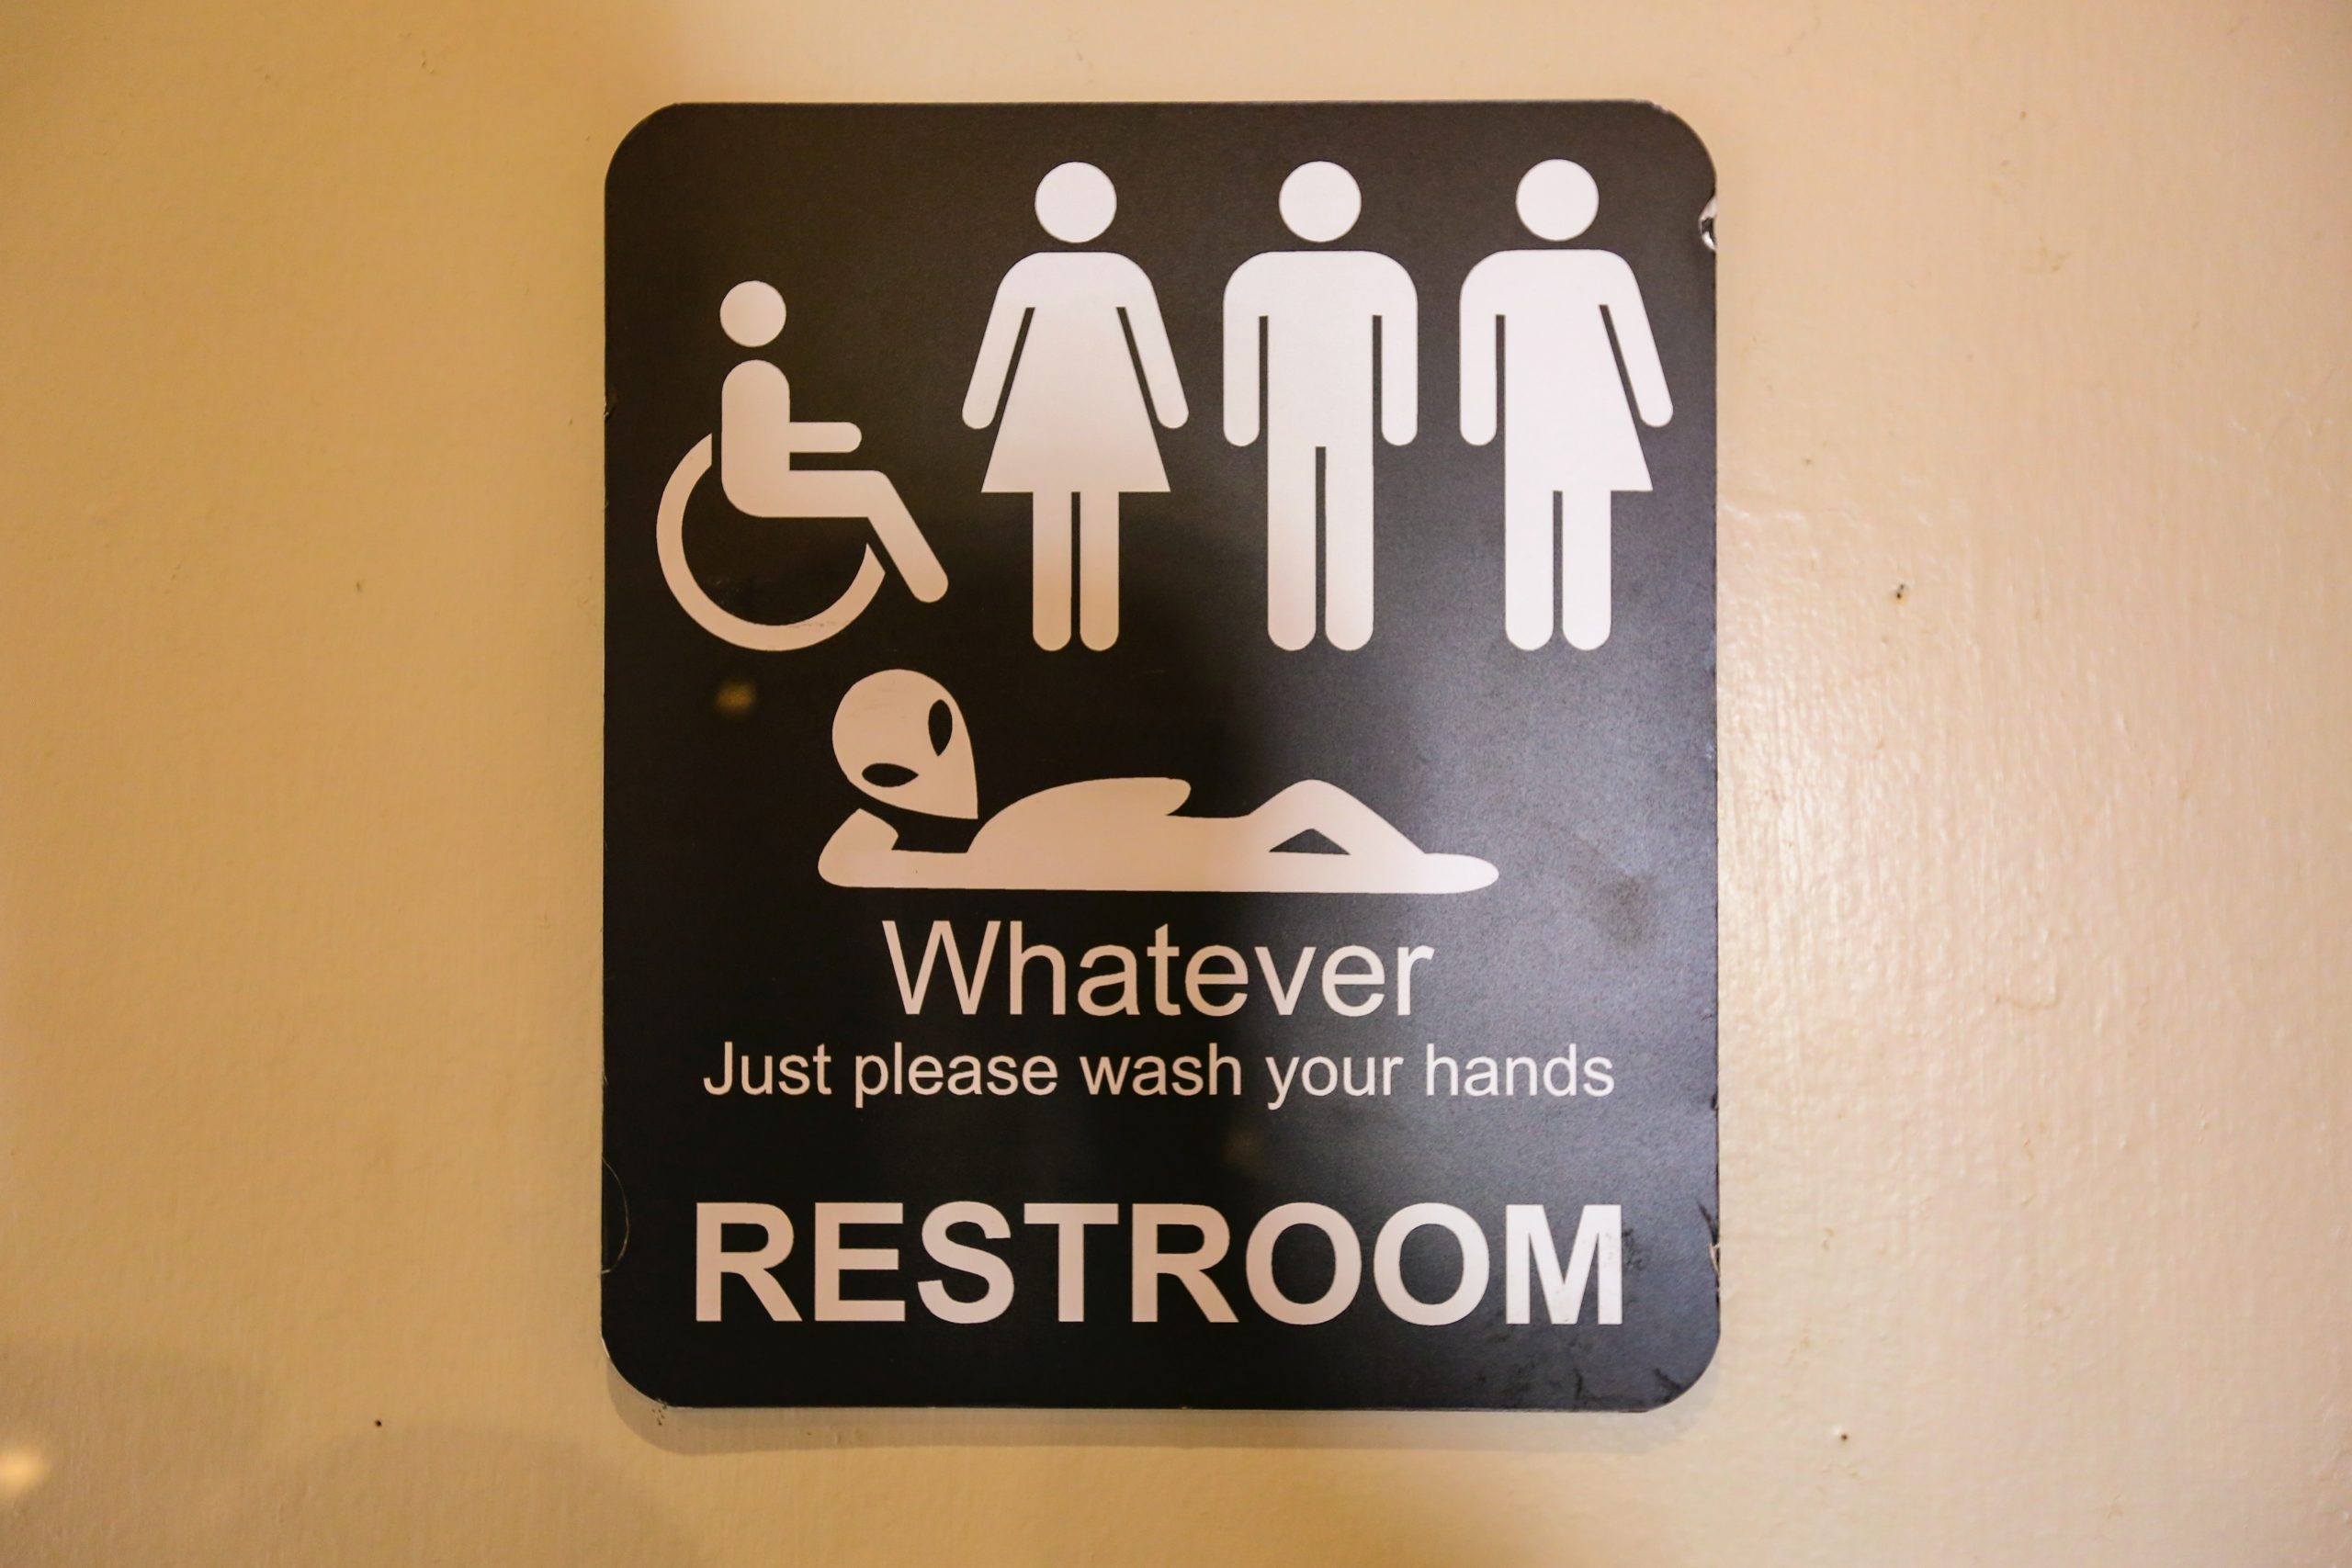 Bathrooms for All… Except for Babies